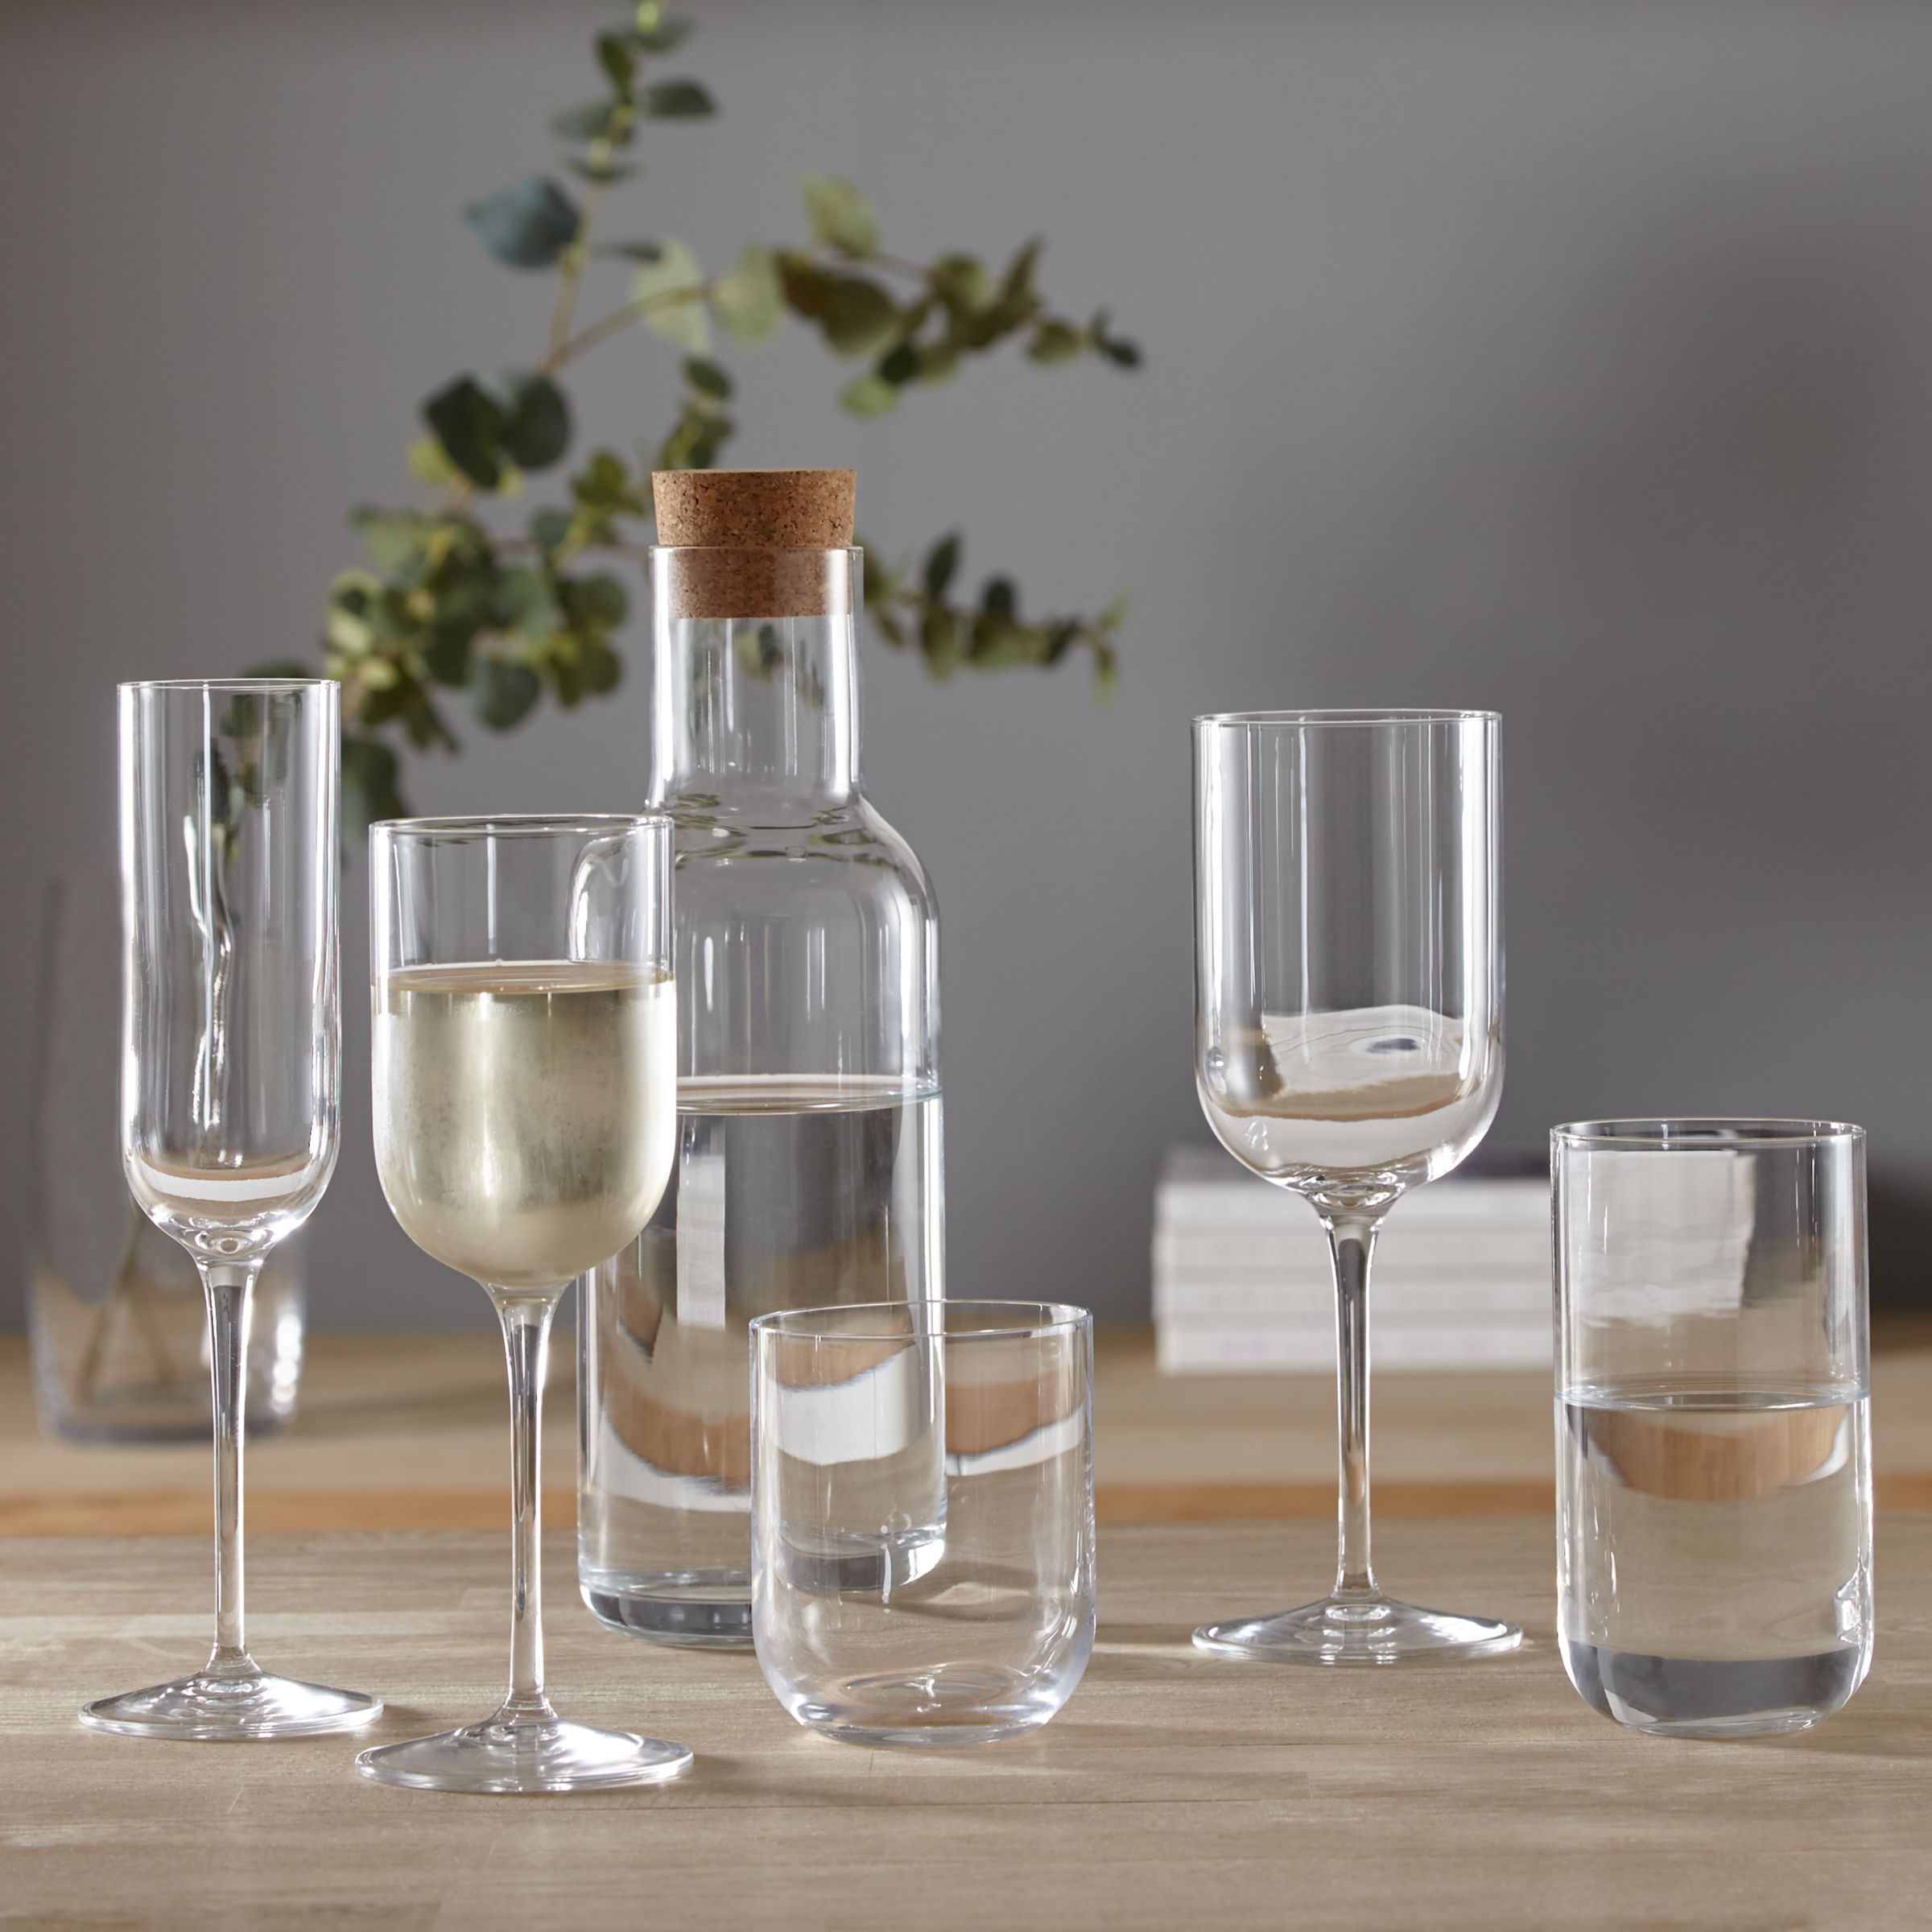 BuyJohn Lewis & Partners Sublime Carafe With Cork, Clear, 1L Online at johnlewis.com